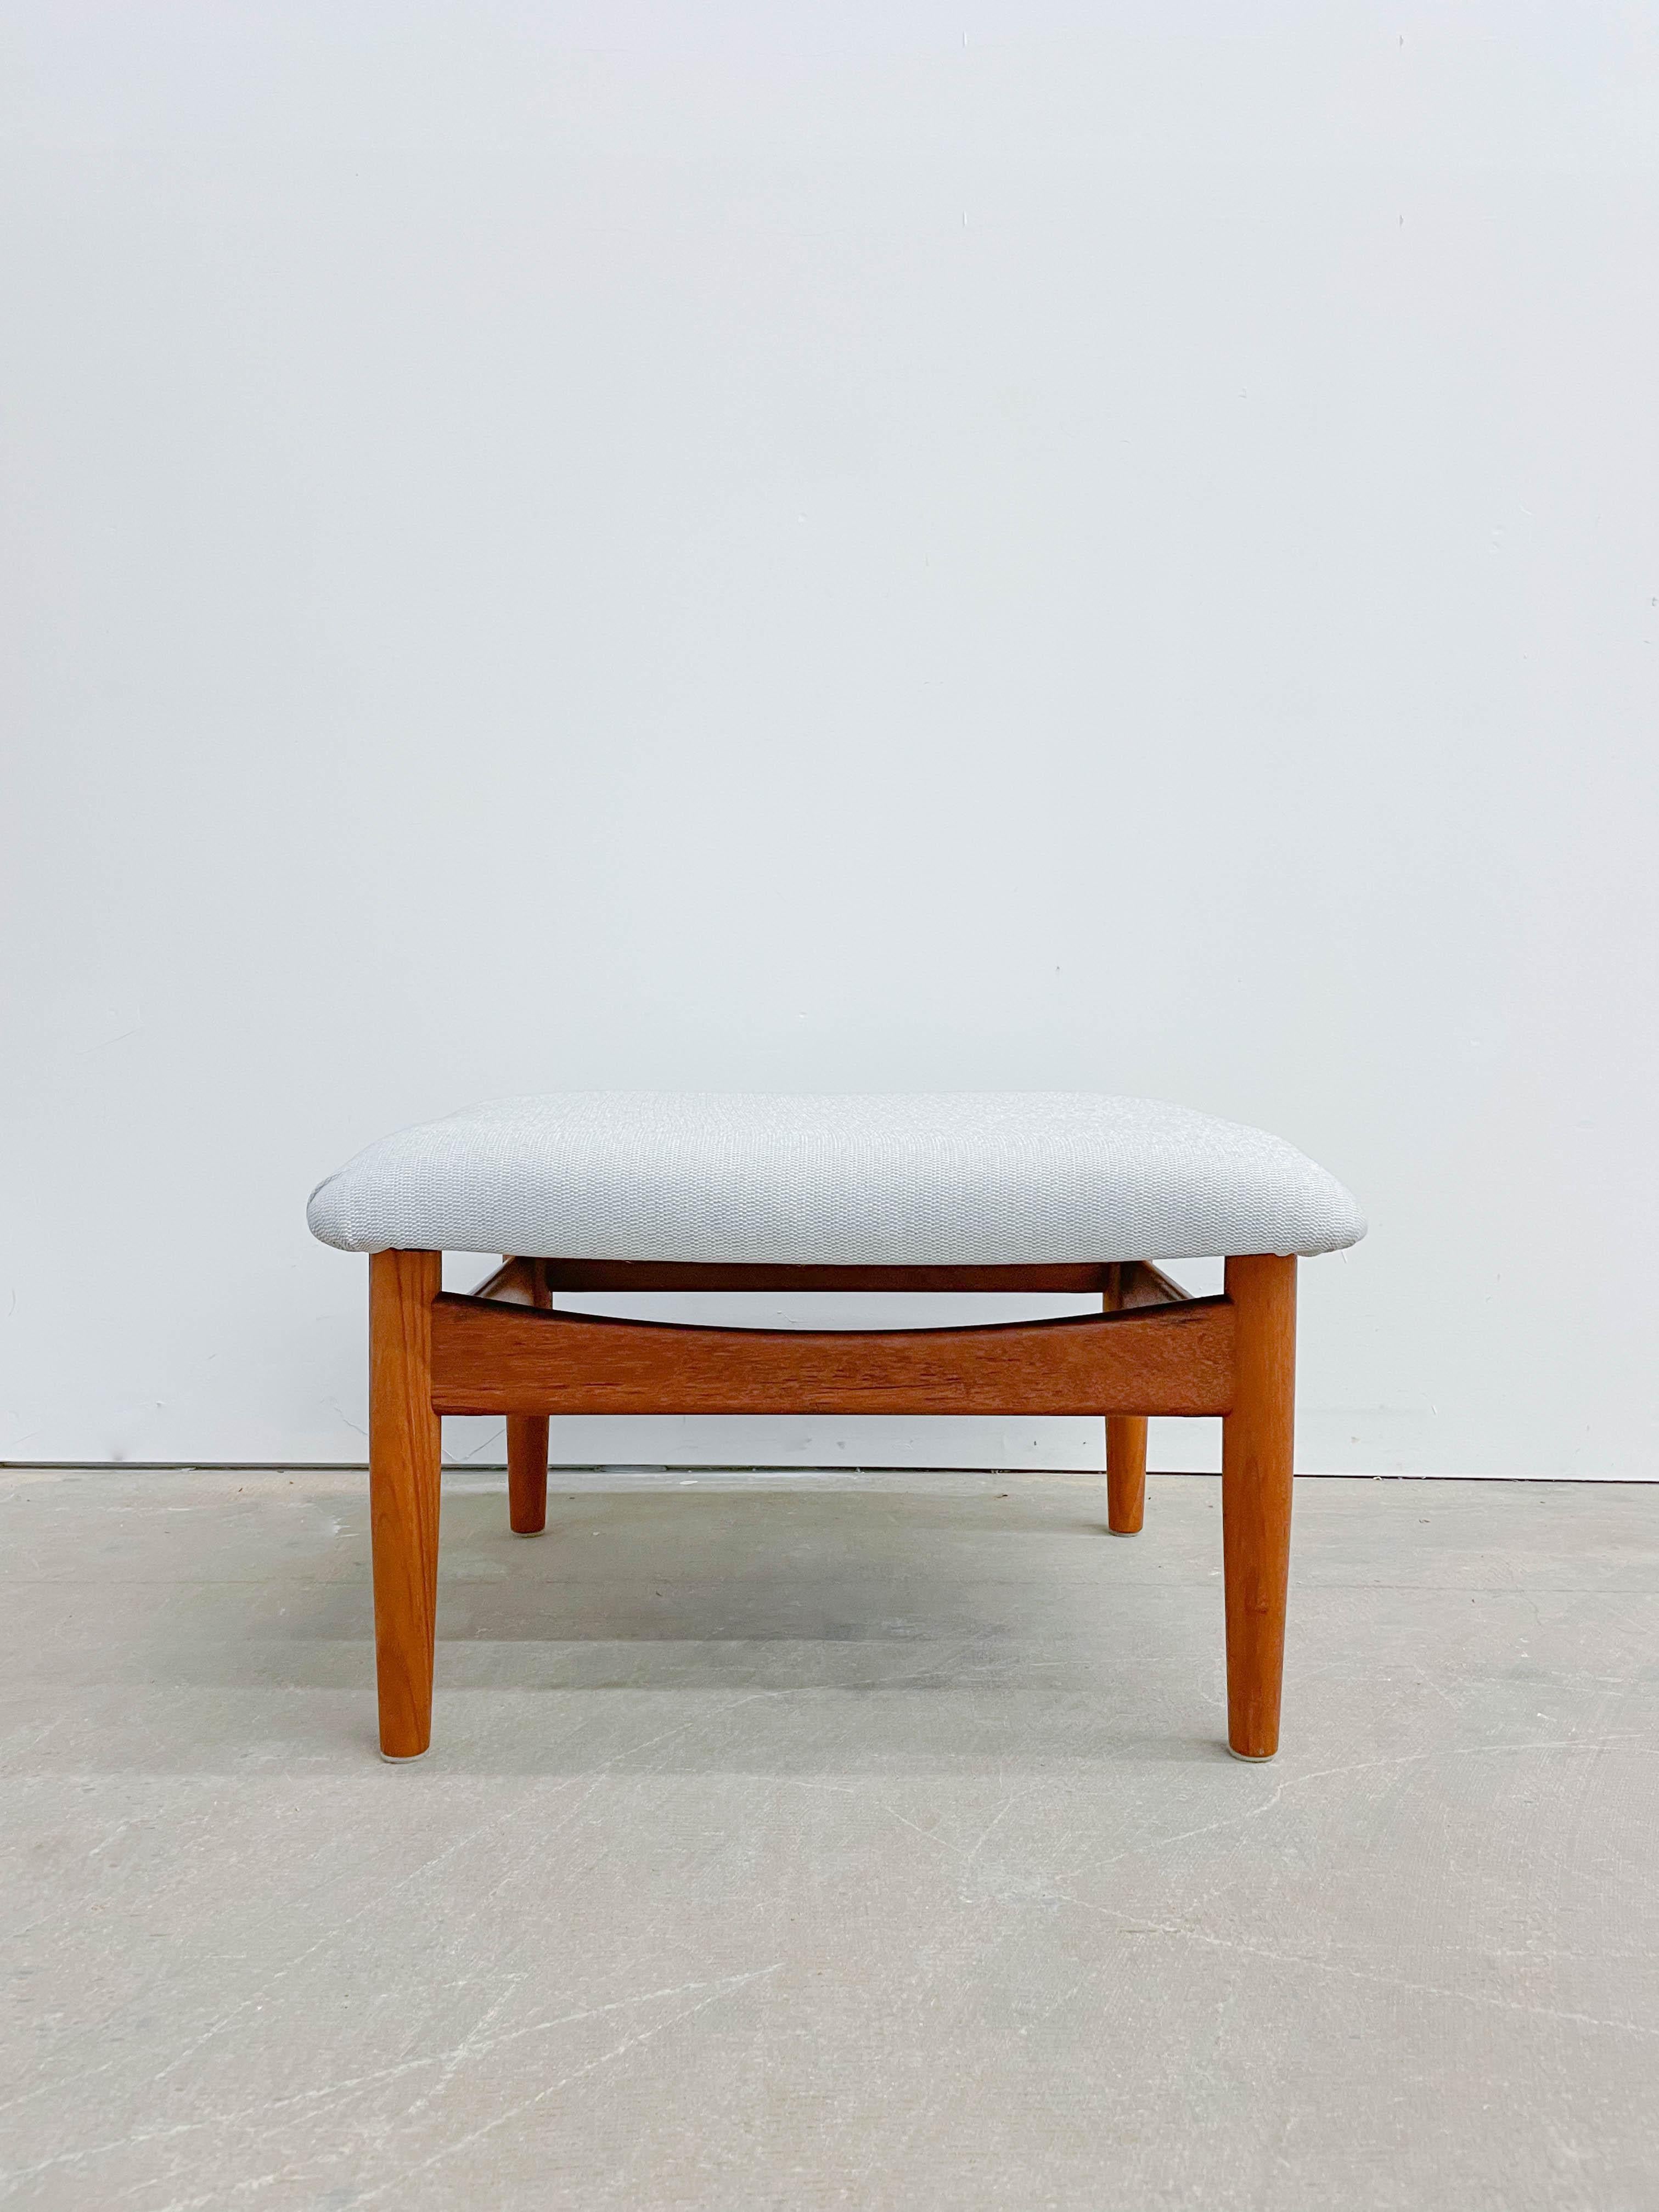 Finn Juhl is arguably the master of Danish mid-century modern design, and this ottoman is no exception. This is a Finn Juhl Japan Chair ottoman designed to be paired with a classic Japan Lounge Chair. However, it pairs just as well with a number of